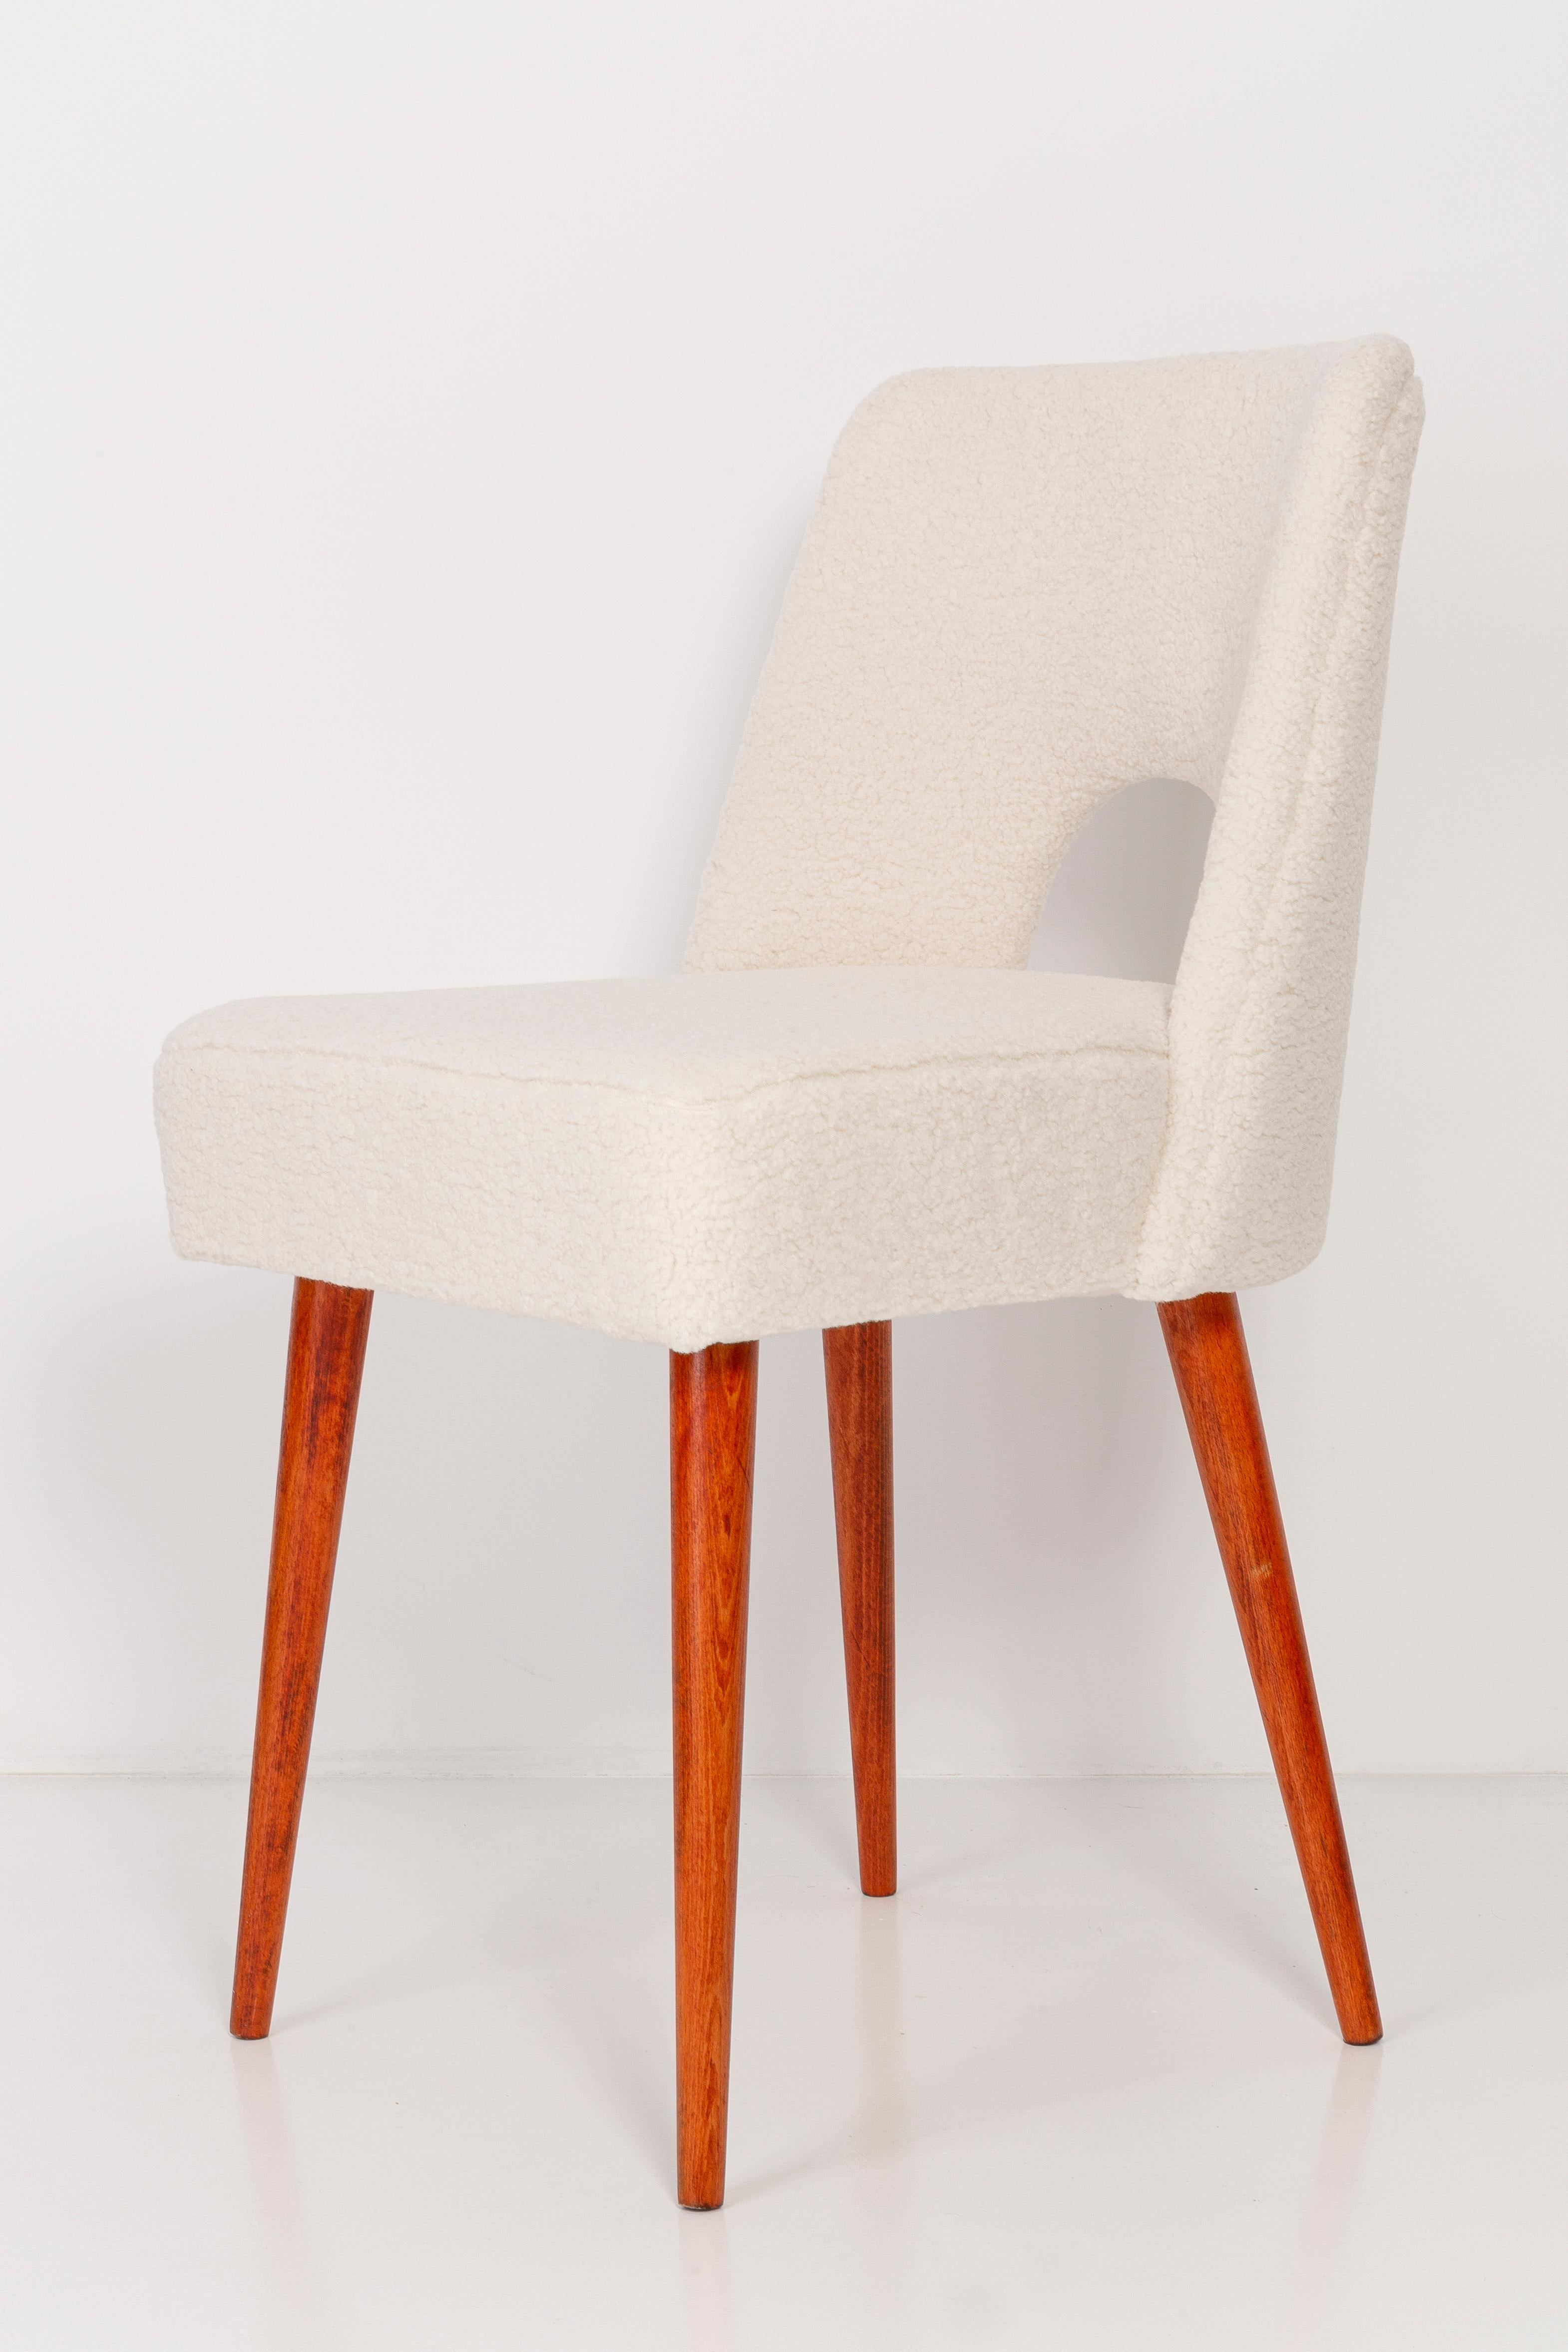 Set of Five Light Crème Boucle 'Shell' Chairs, 1960s In Good Condition For Sale In 05-080 Hornowek, PL